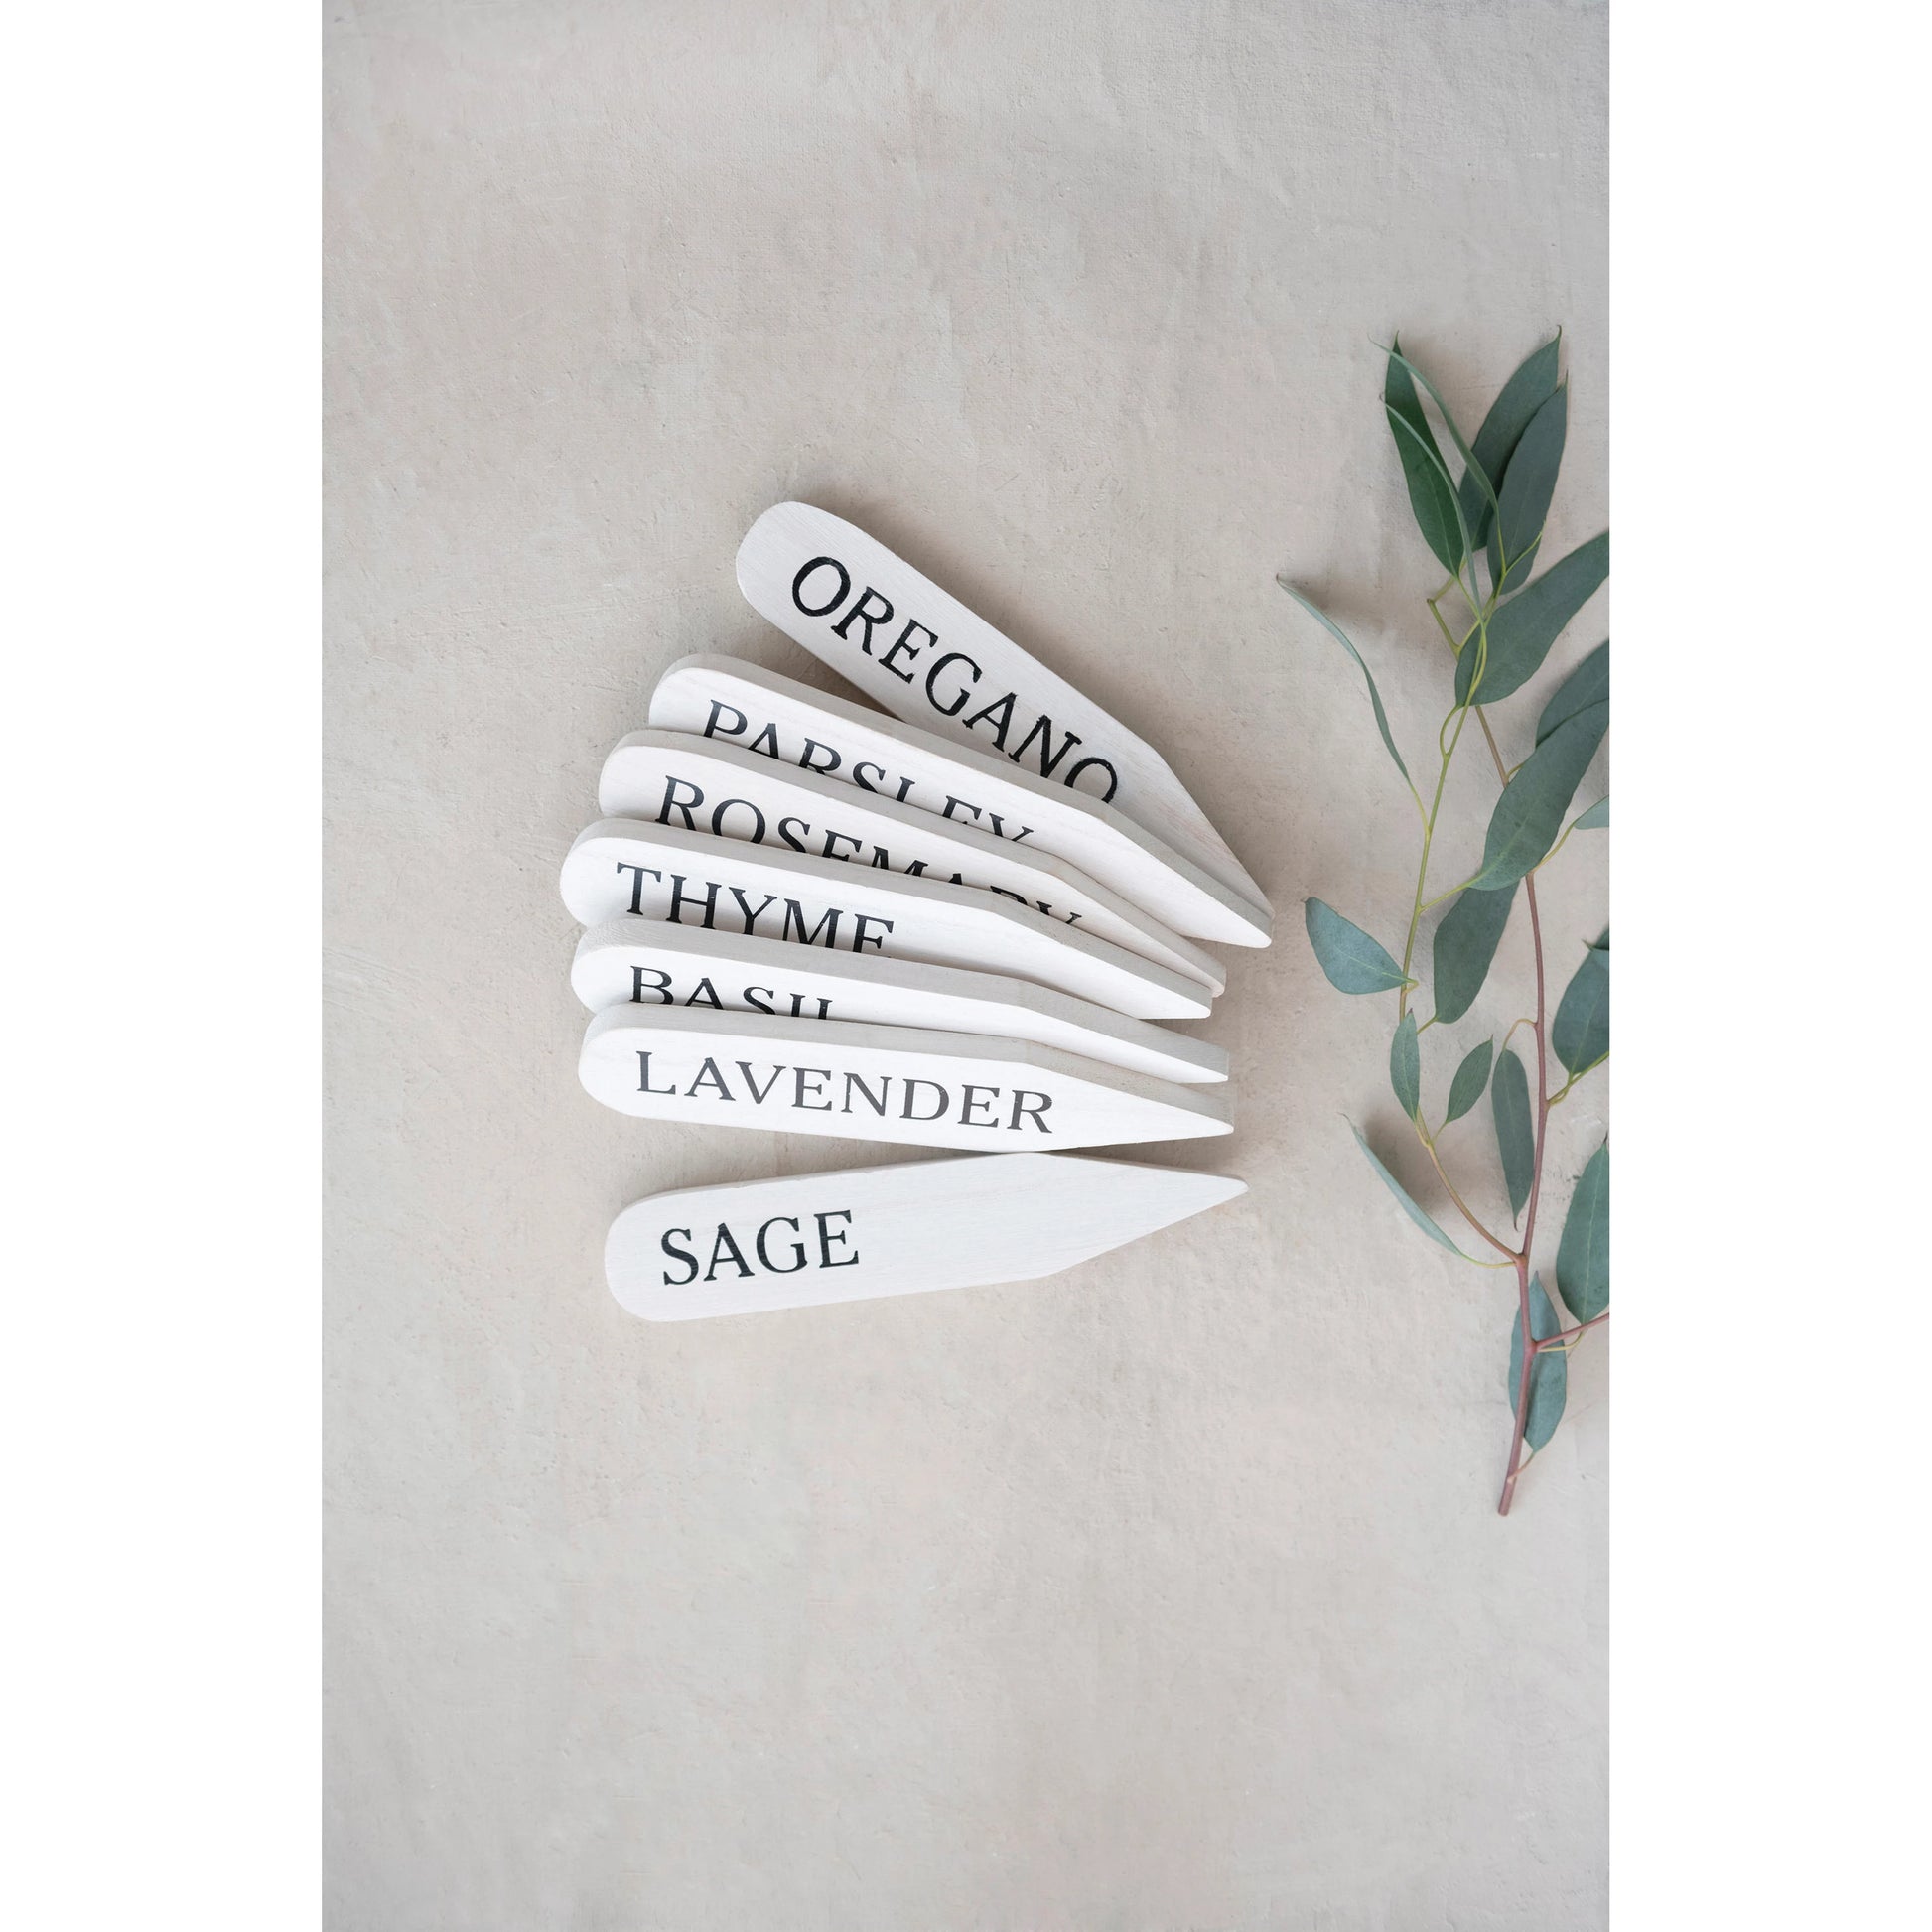 herb garden markers, feathered farmhouse